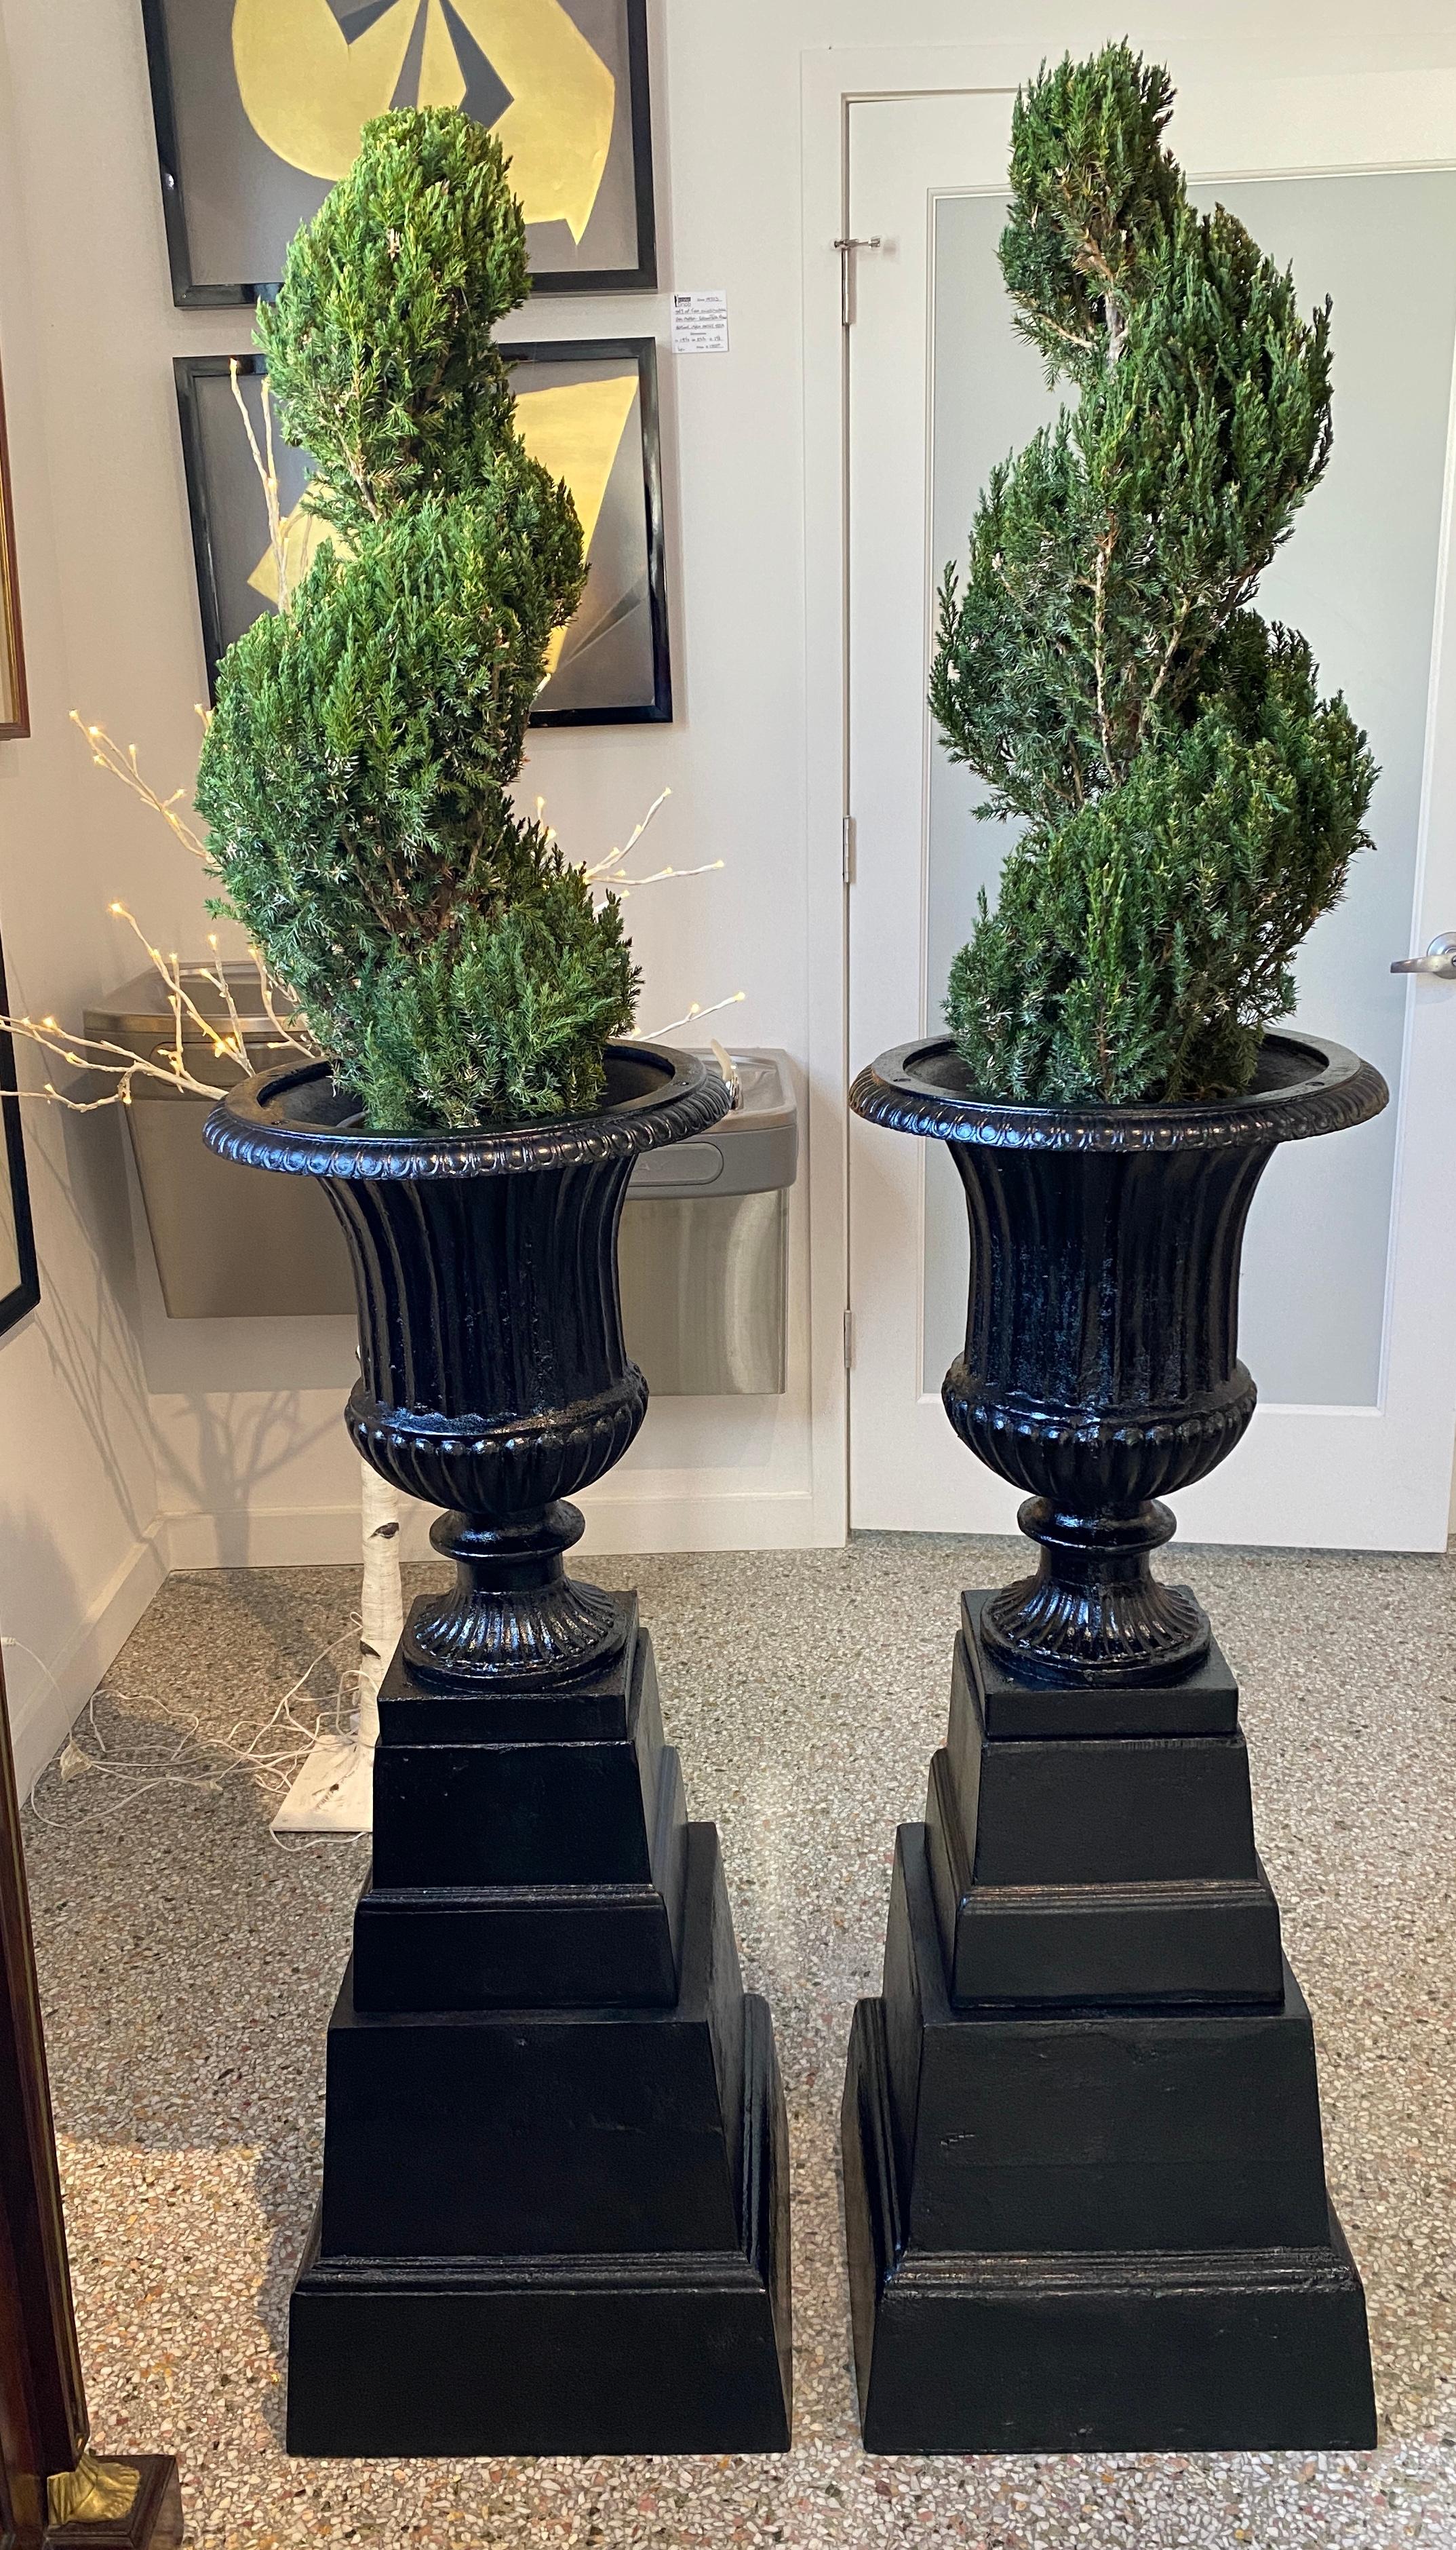 This stylish and chic pair of english regency style garden urns will make a subtle statement with their scale and form. 

Note: The pieces have been professionally restored, with sandblasting and painting.

Note: Each piece is fabricated with